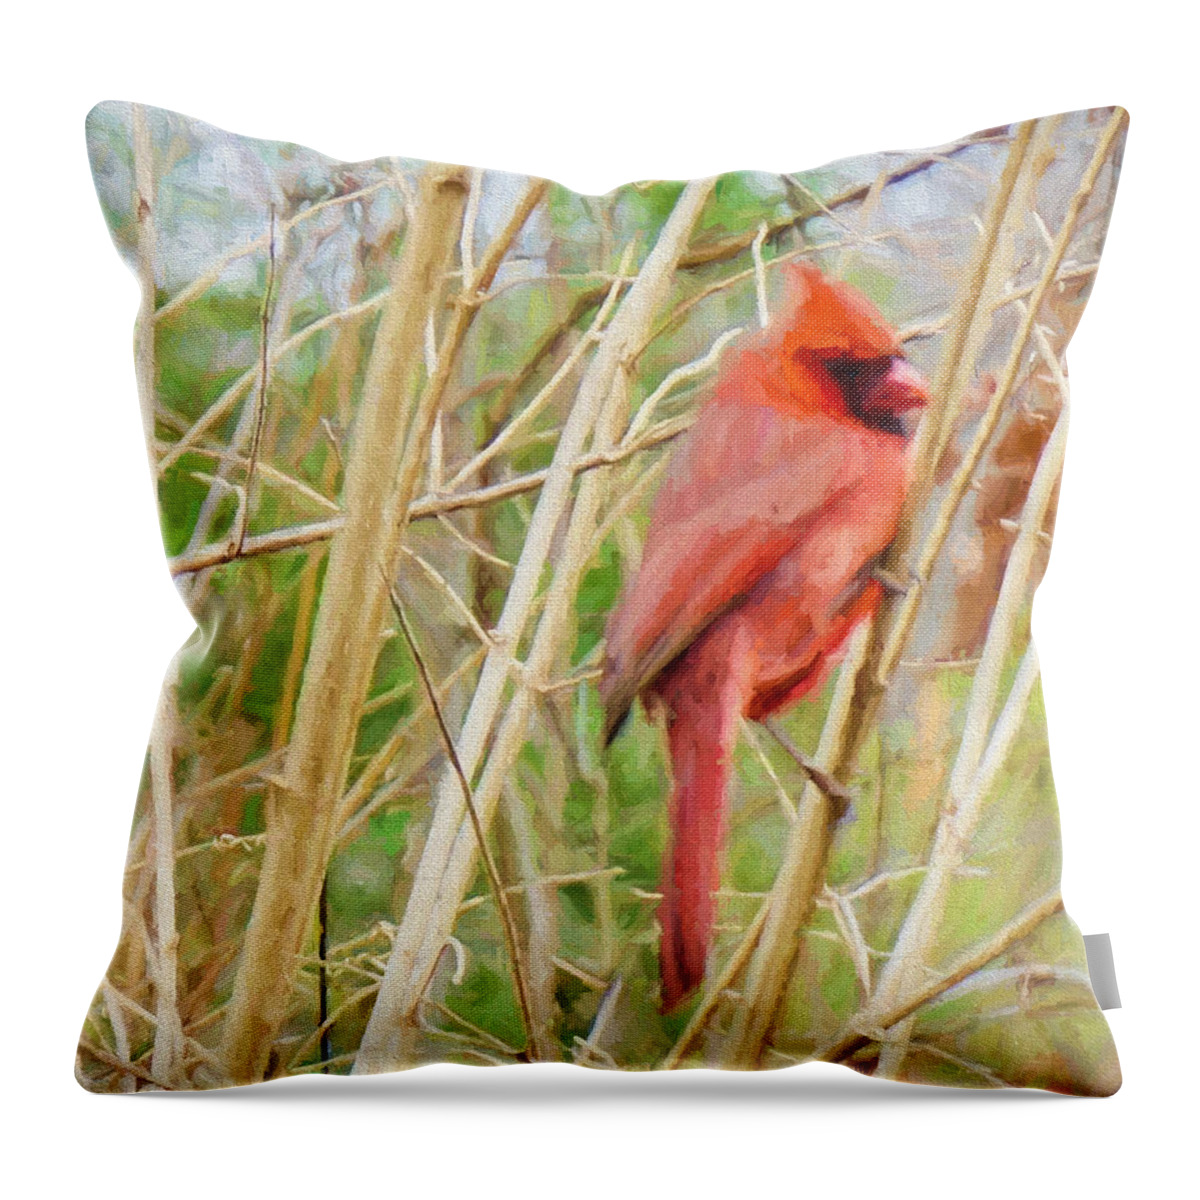 Bird Throw Pillow featuring the photograph Keeping Watch Male Cardinal by Denise Beverly